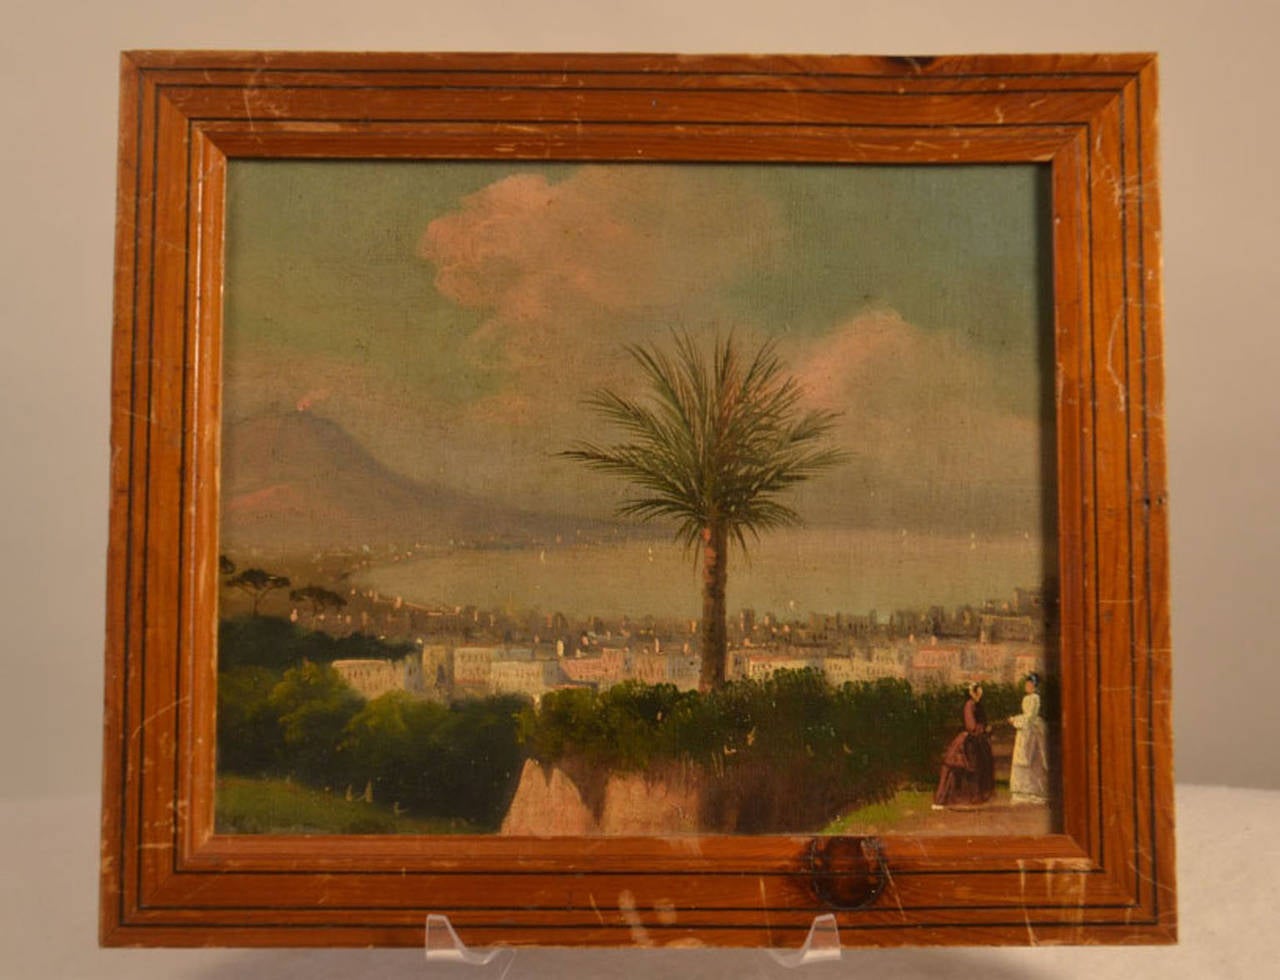 Small framed oil painting of naples. There is no signature found. There are scratches on the painting's frame. (See picture.)